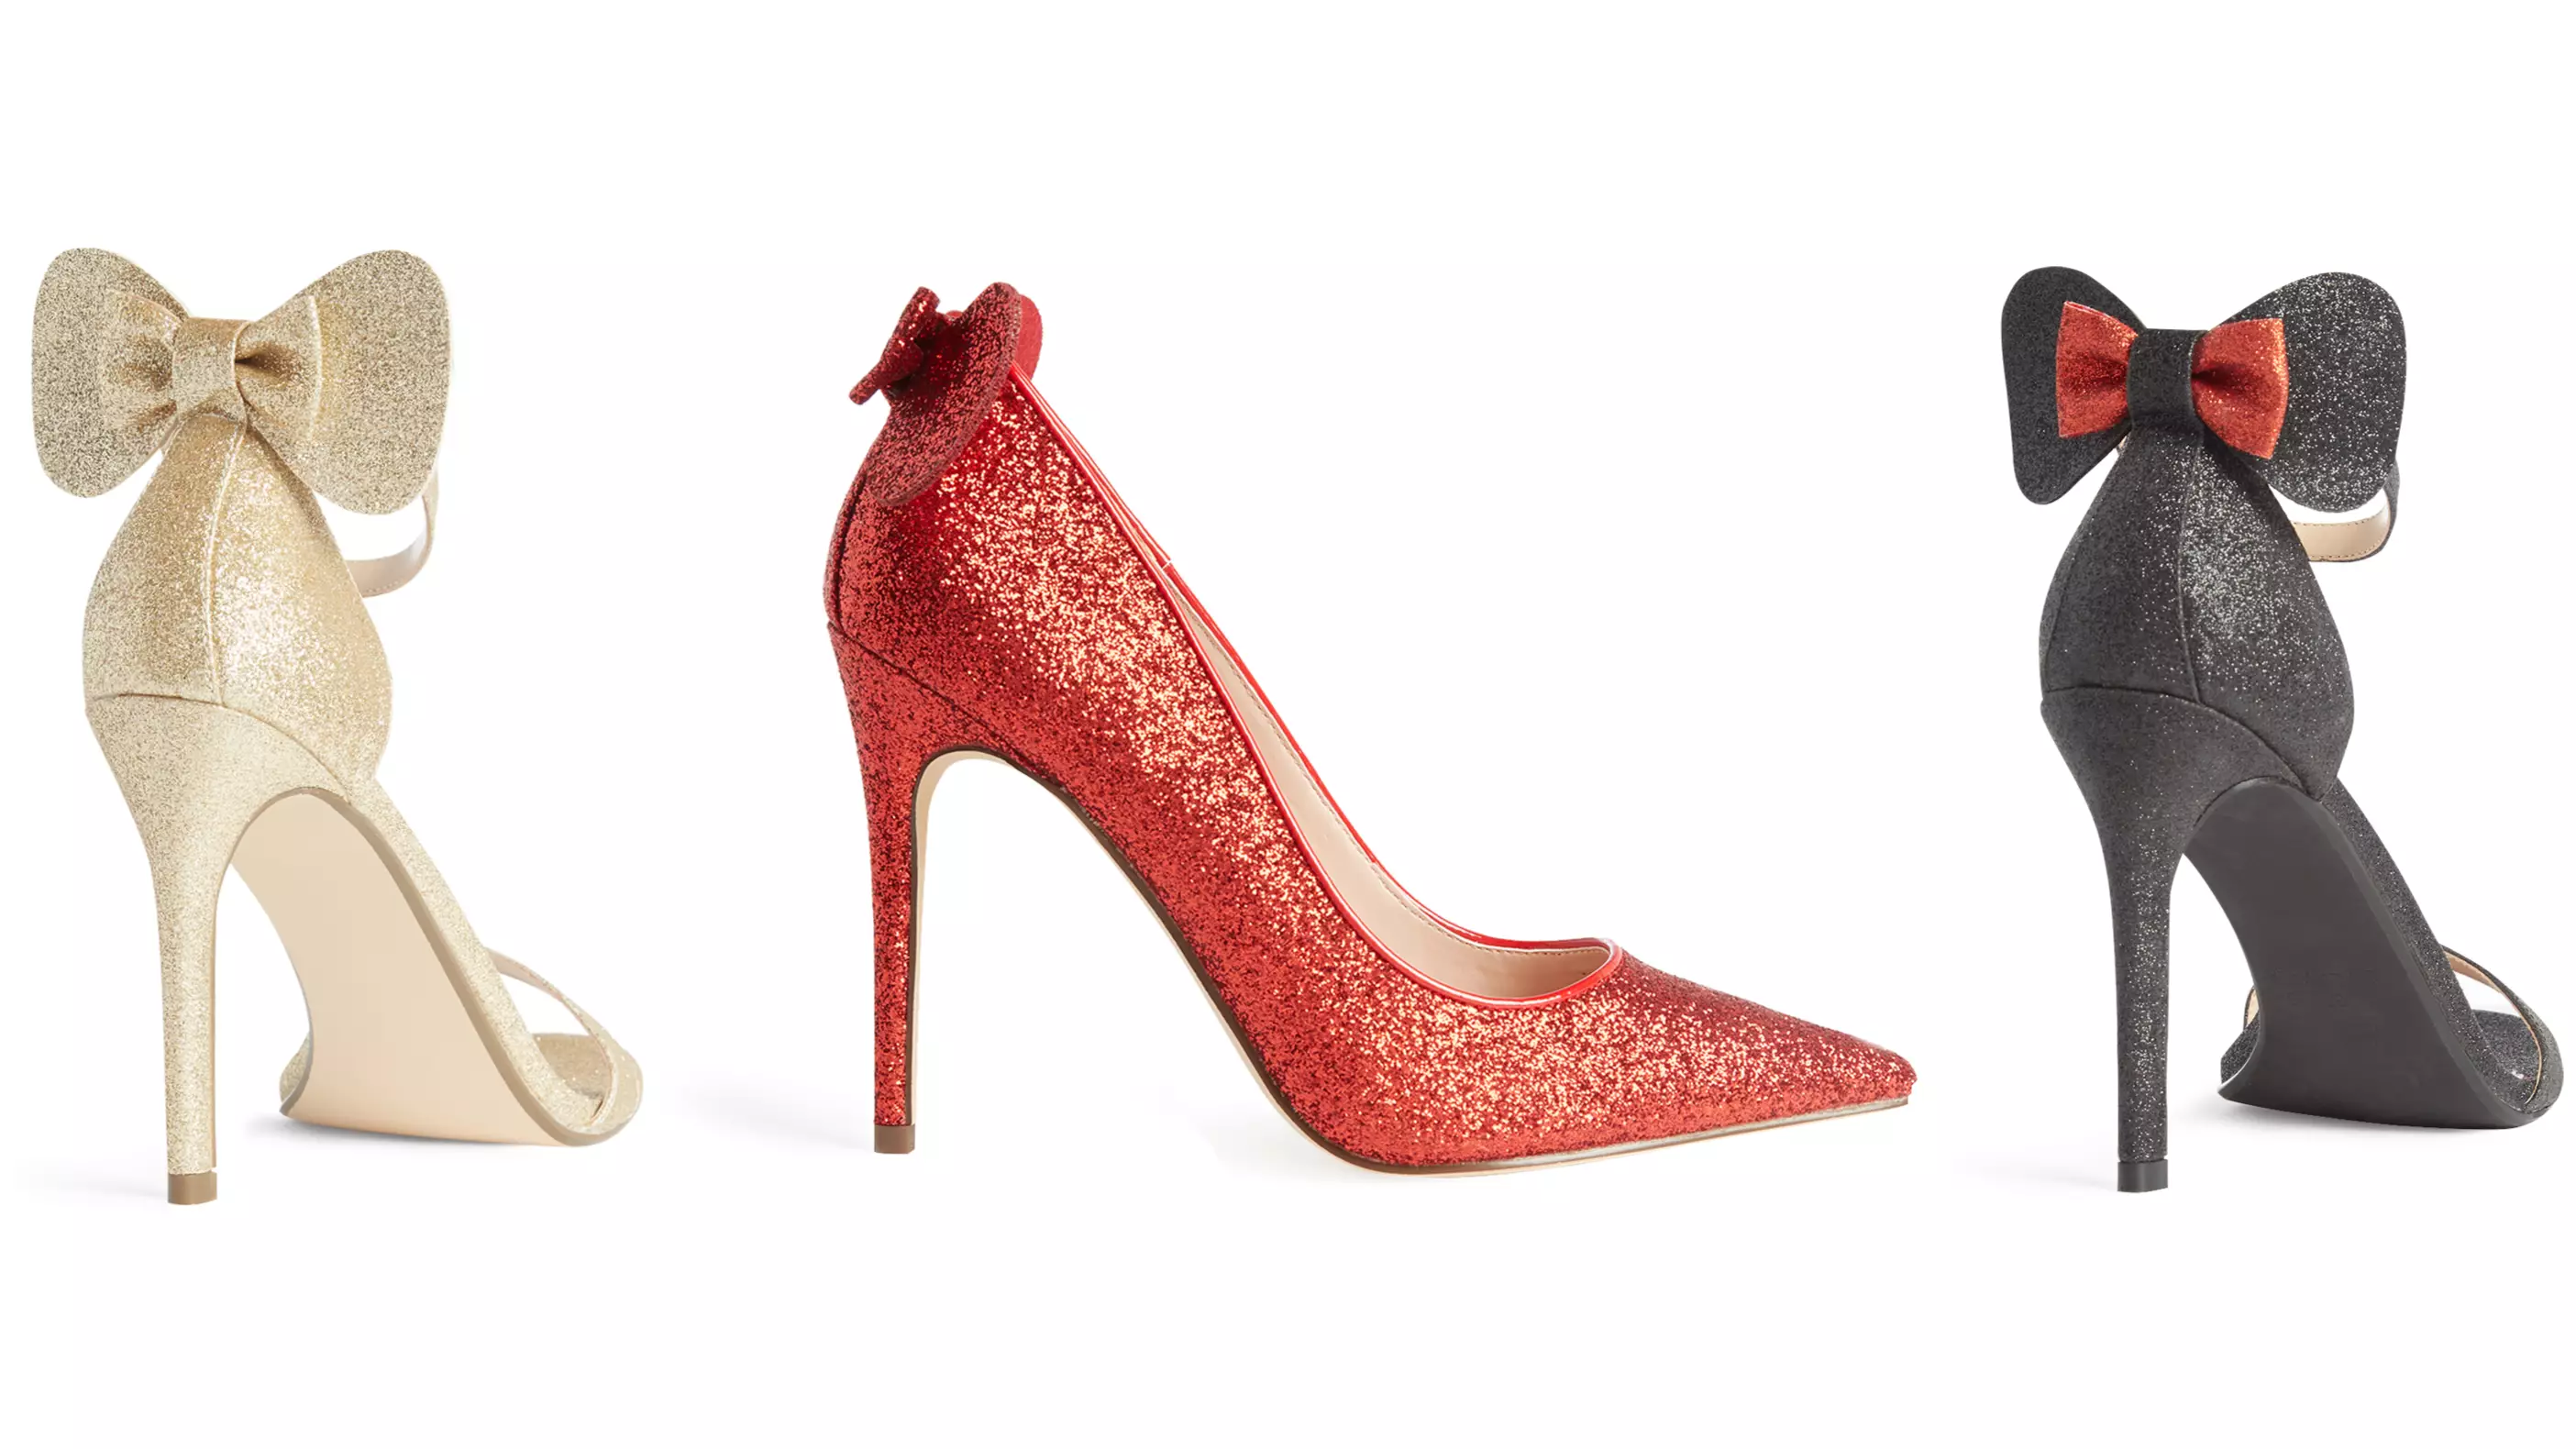 Primark's Glittery Minnie Mouse Heels Are Perfect For Party Season